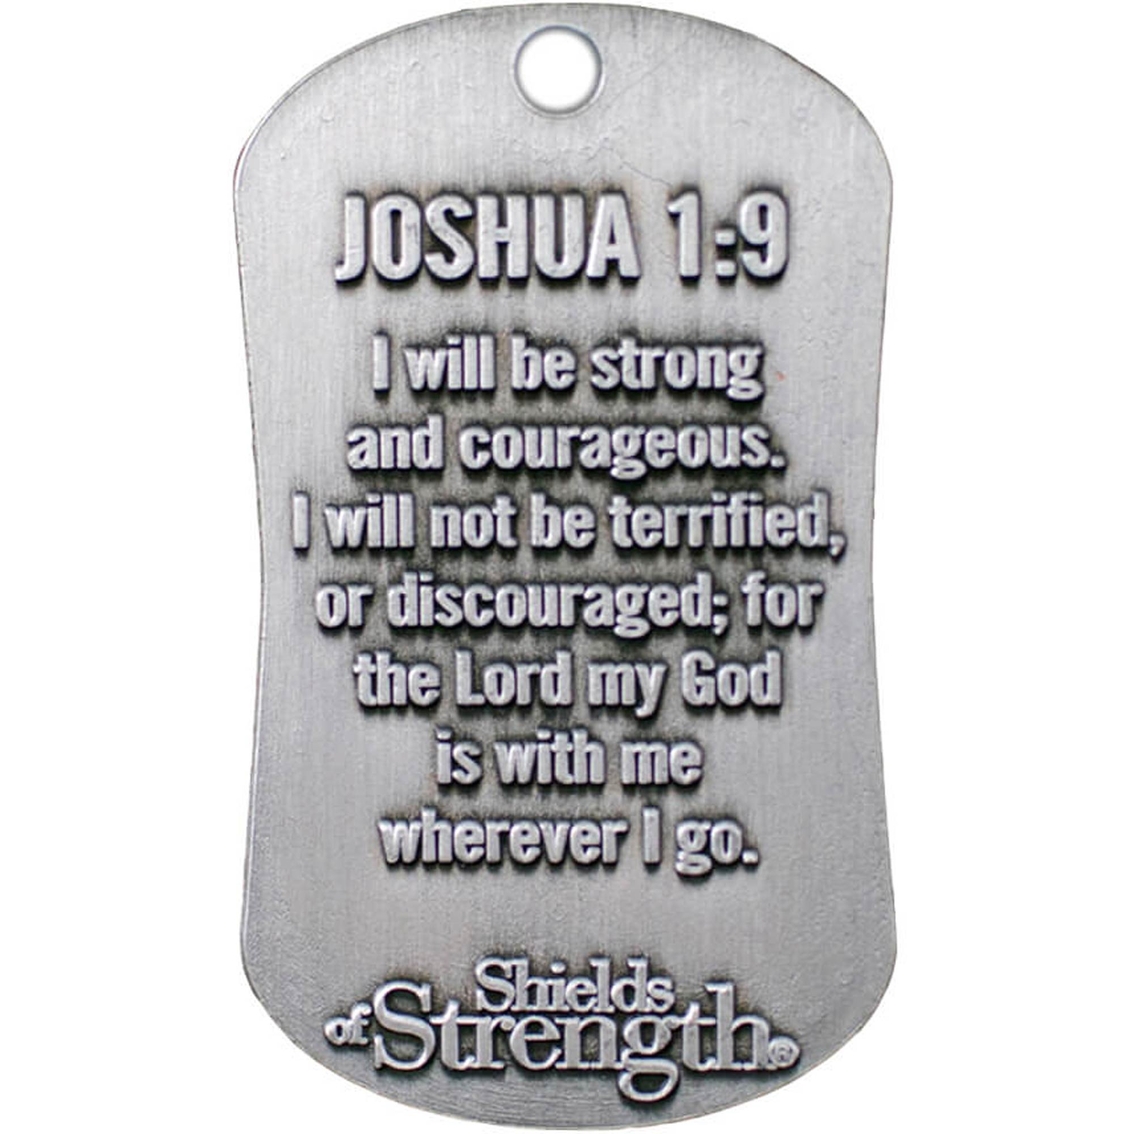 Shields of Strength Conquer the Fear Dog Tag Necklace, Joshua 1:9 - Image 2 of 2